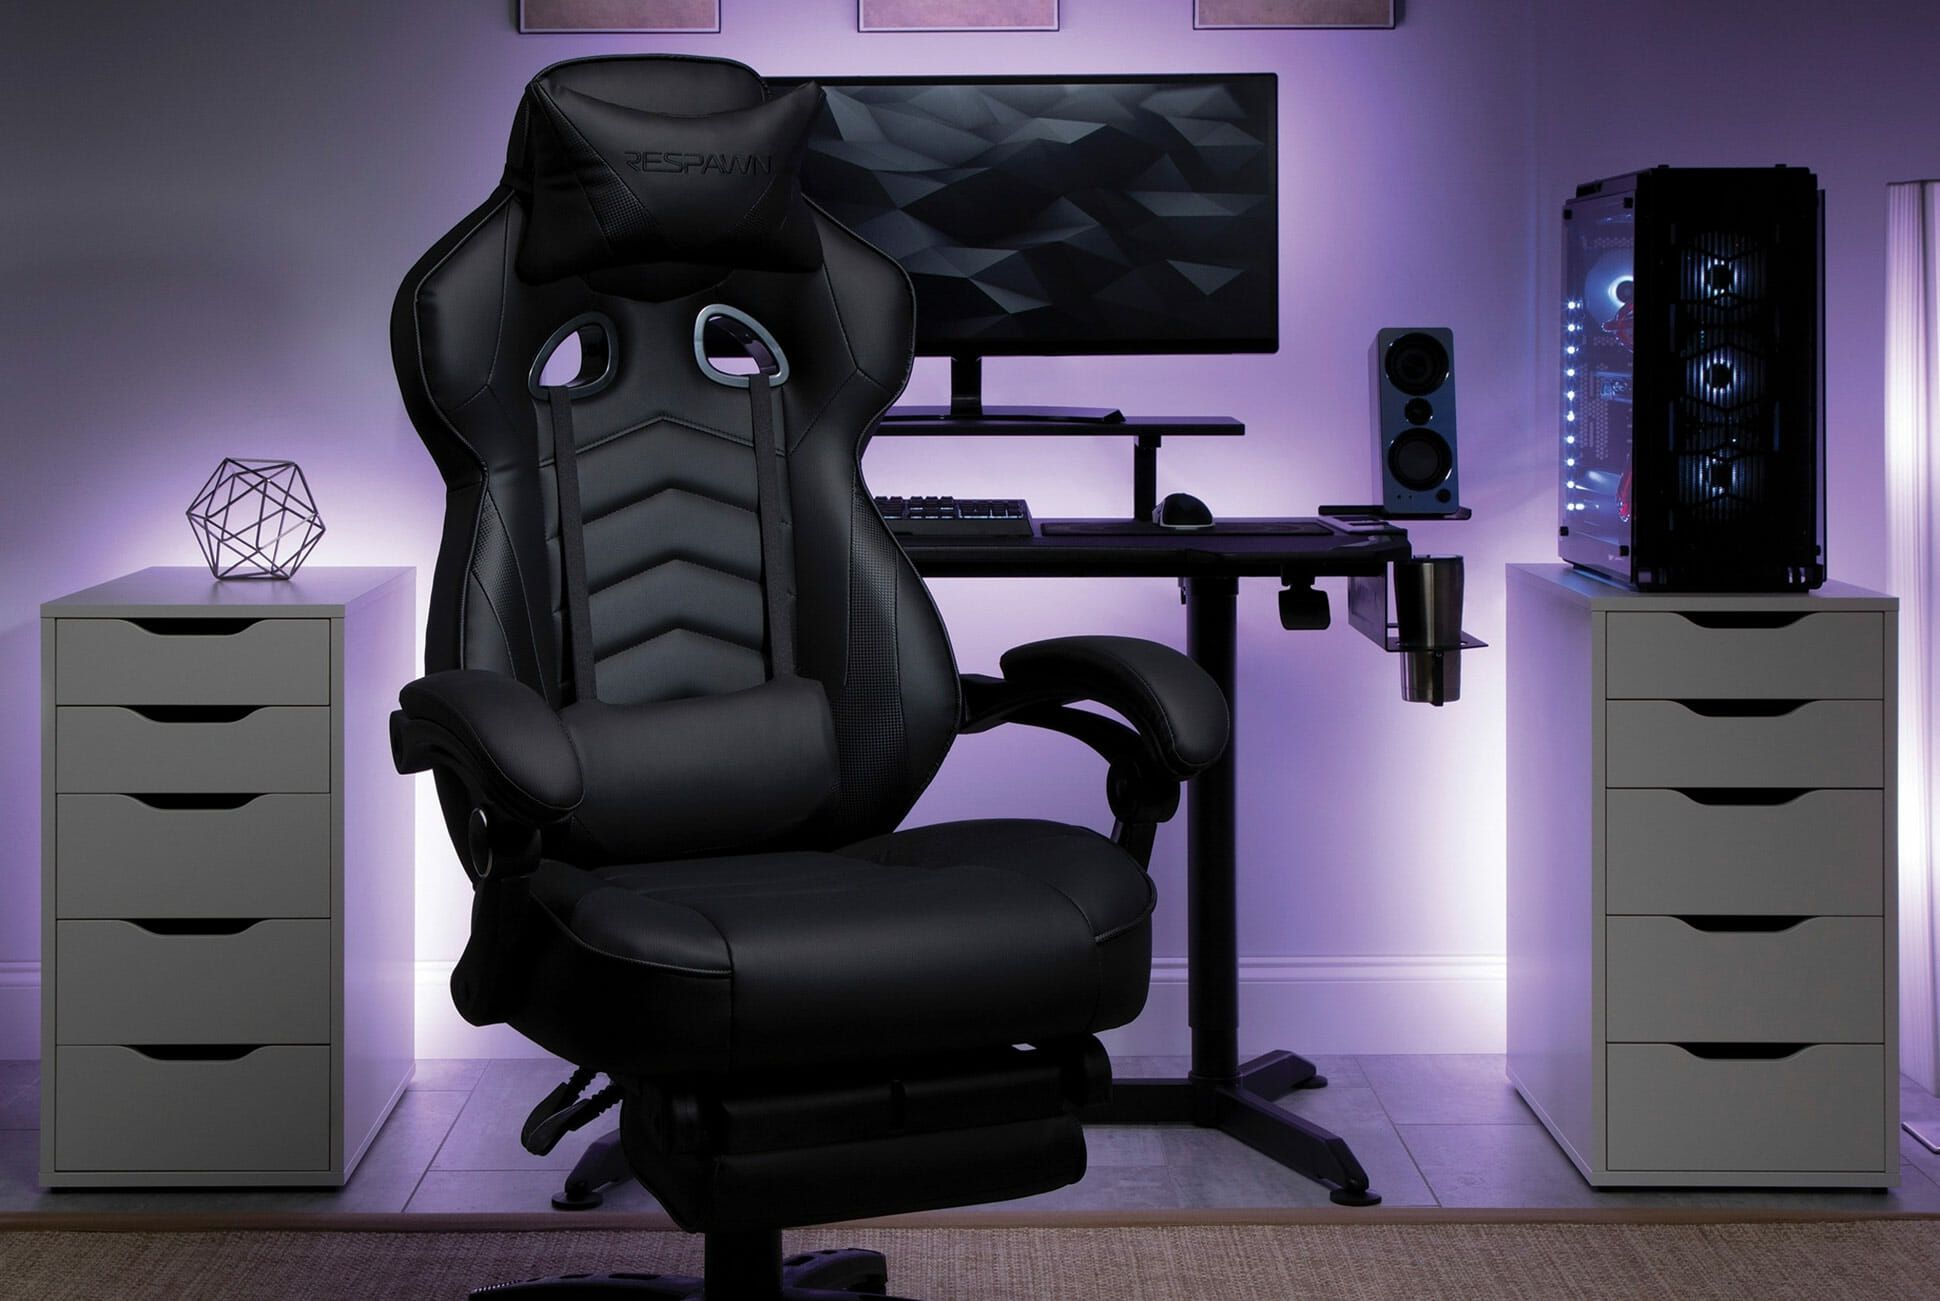 Esports Video Game Chair Gaming Chair Racing Style Office Chair Swivel Computer Gamer Chair with Fully Foam Lumbor Support